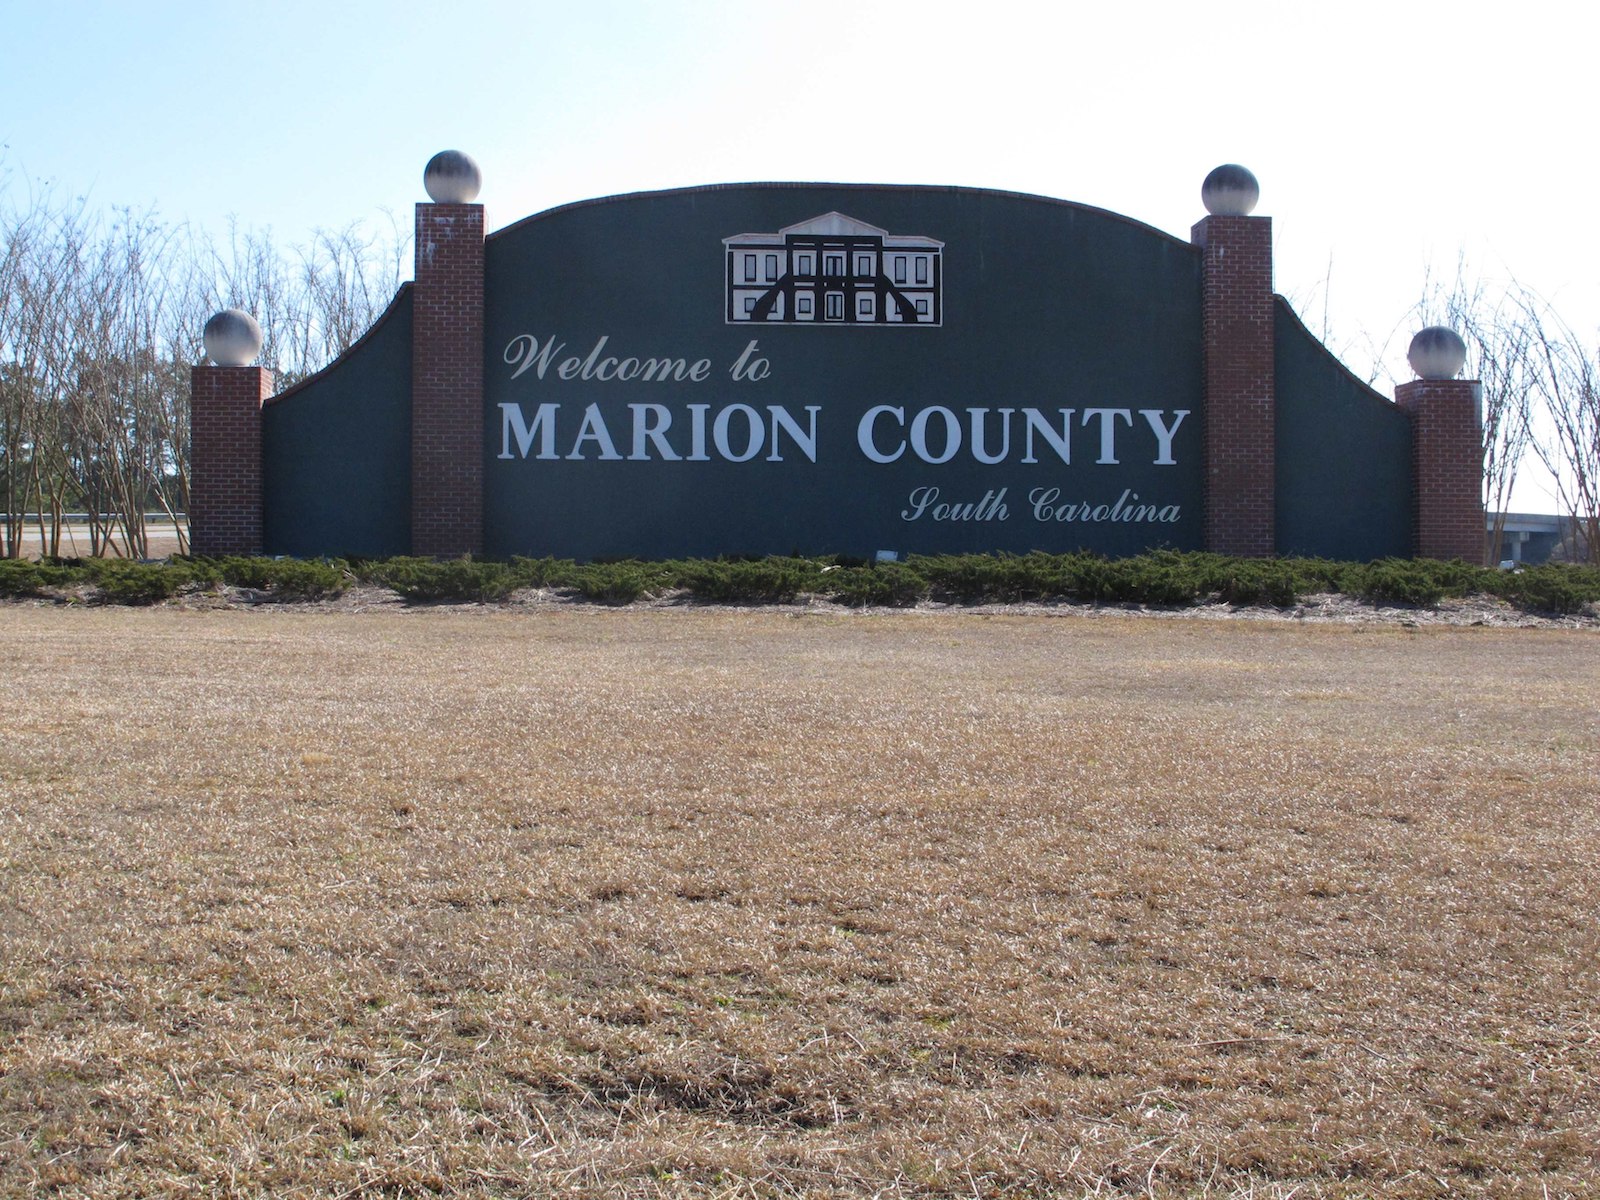 a sign welcomes people to marion county south carolina